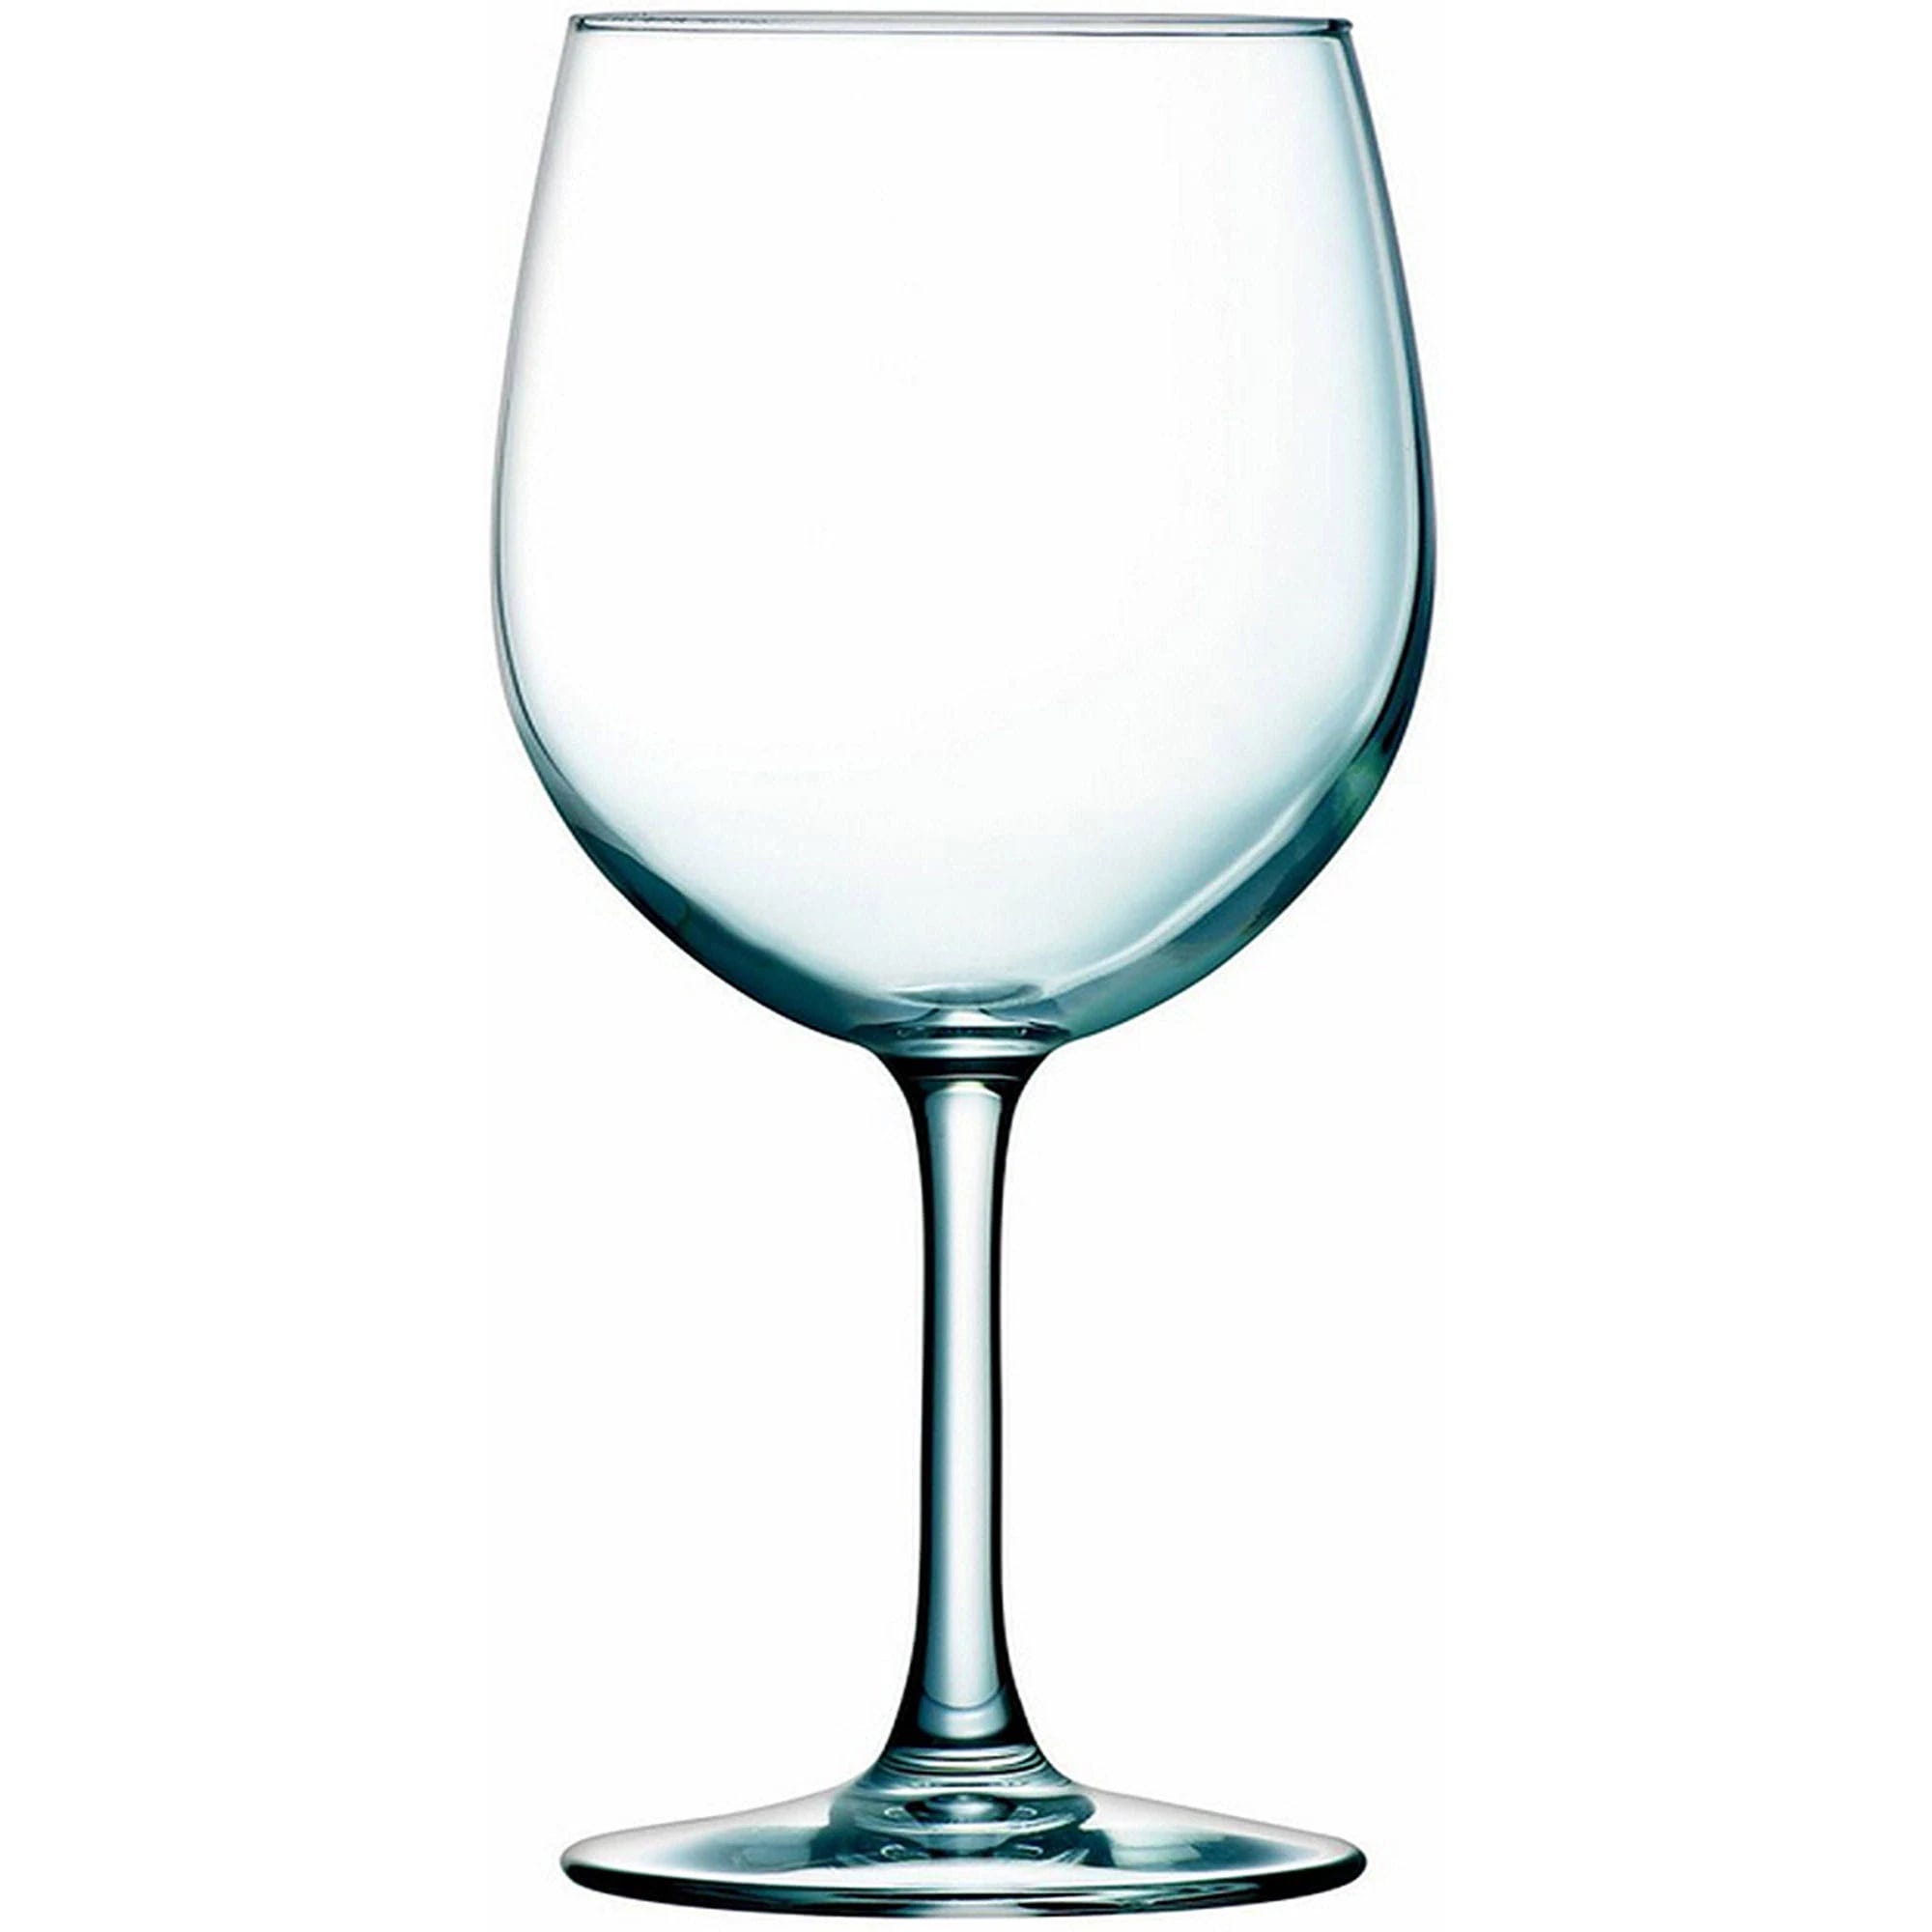 Mainstays 12 oz. Alto Stemmed Wine Glass - Versatile Barware for Every Occasion | Image